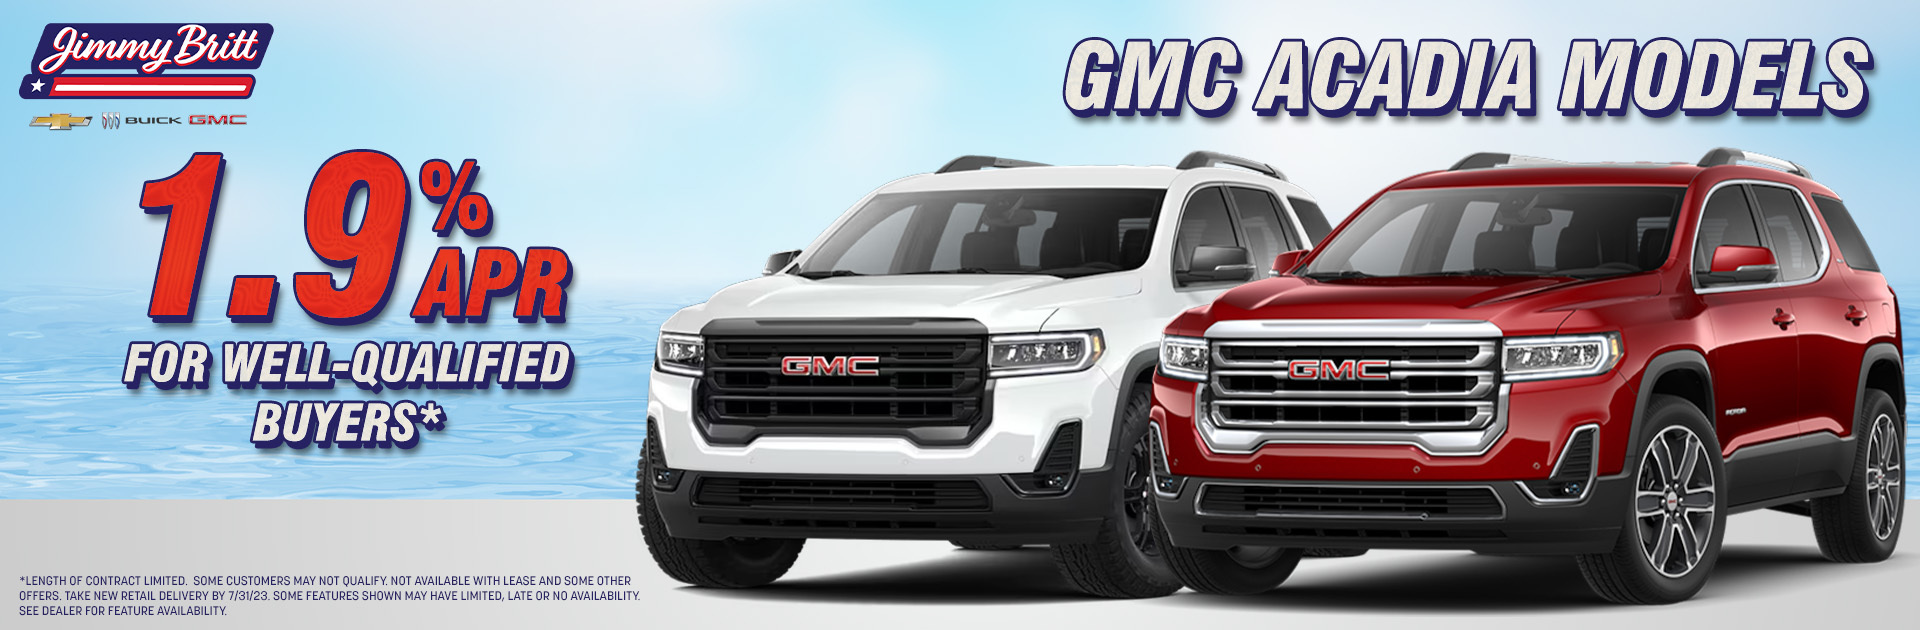 1.9% APR for Well-Qualified Buyers on GMC Acadia Models!